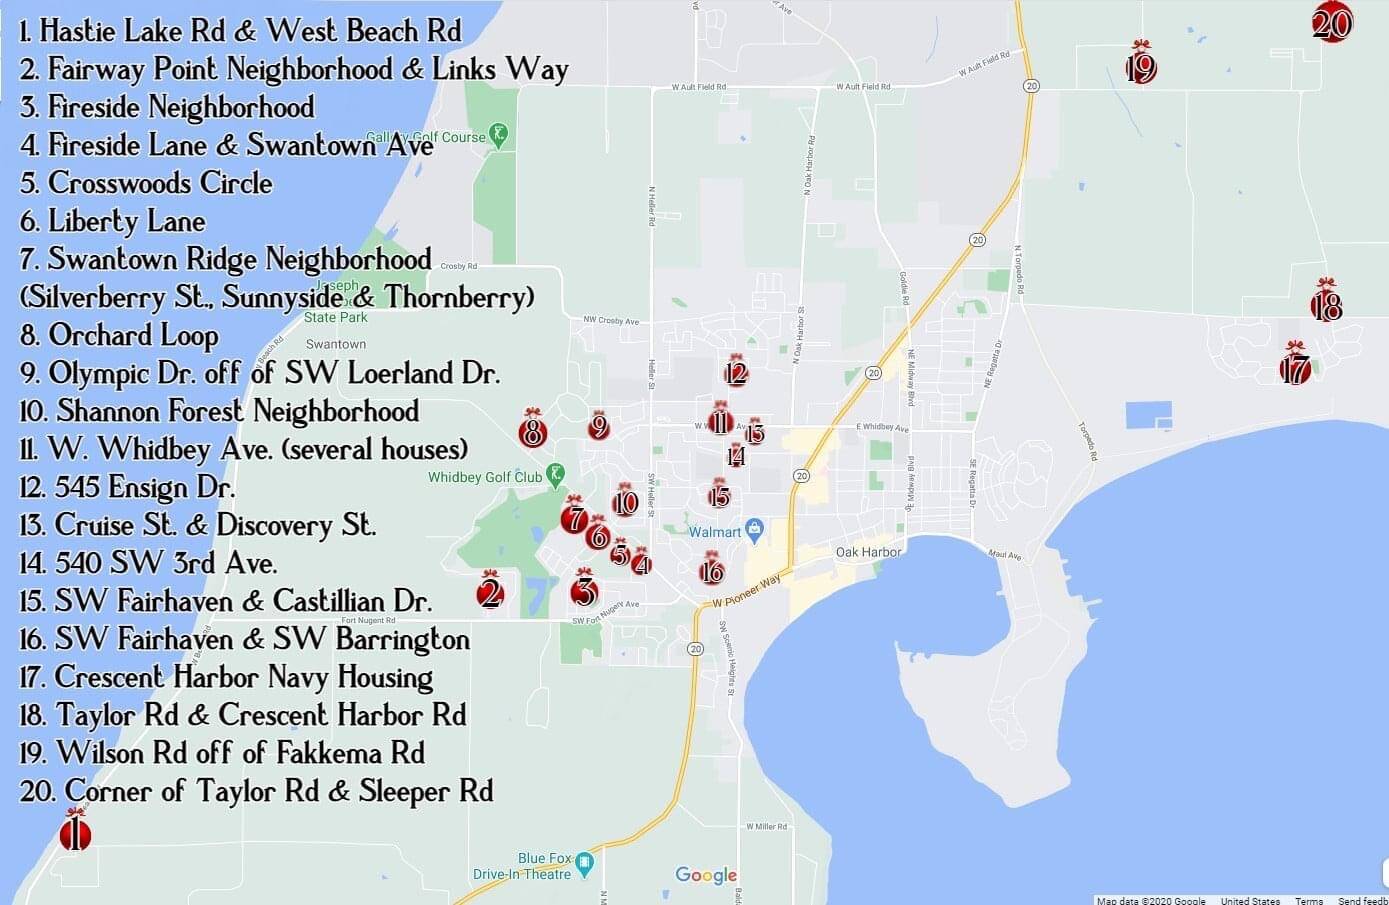 For the second year in a row, Oak Harbor resident Carrie Stucky created a map of Christmas lights on North Whidbey. She created the tour based on her observations and suggestions from people in the community. Her family loves to drive around every year looking at homes decorated for the holidays.
"Covid has made the last couple years so difficult for so many of us," she said. "Since Christmas decorations bring so much joy to people, I wanted to make it really easy for people to find Christmas lights around town."